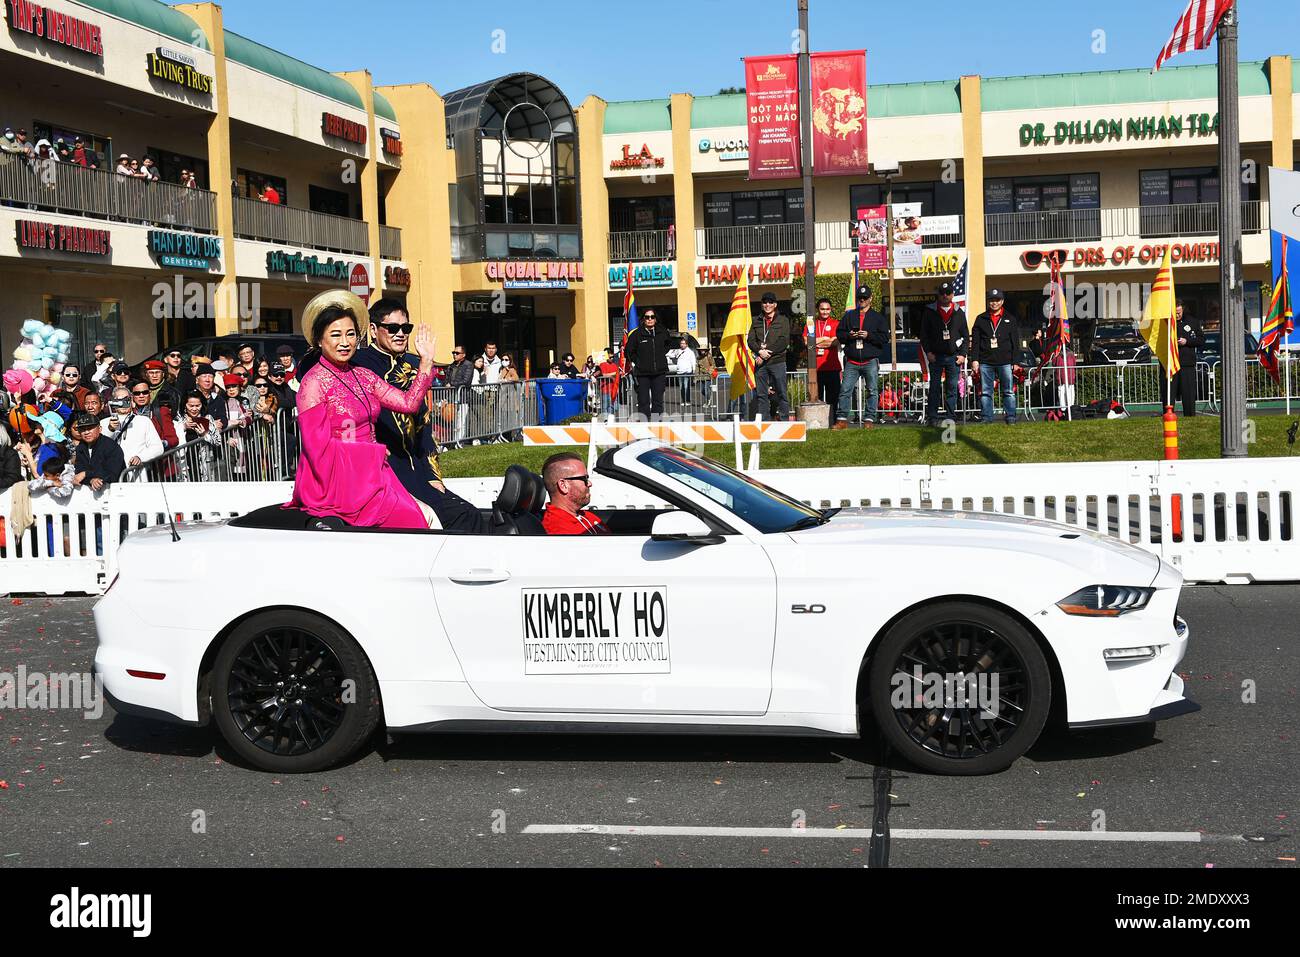 WESTMINSTER, CALIFORNIA - 22 JAN 2023:  Westminster City Council member Kimberly Ho at the Tet Parade Celebrating the Year of the Cat. Stock Photo